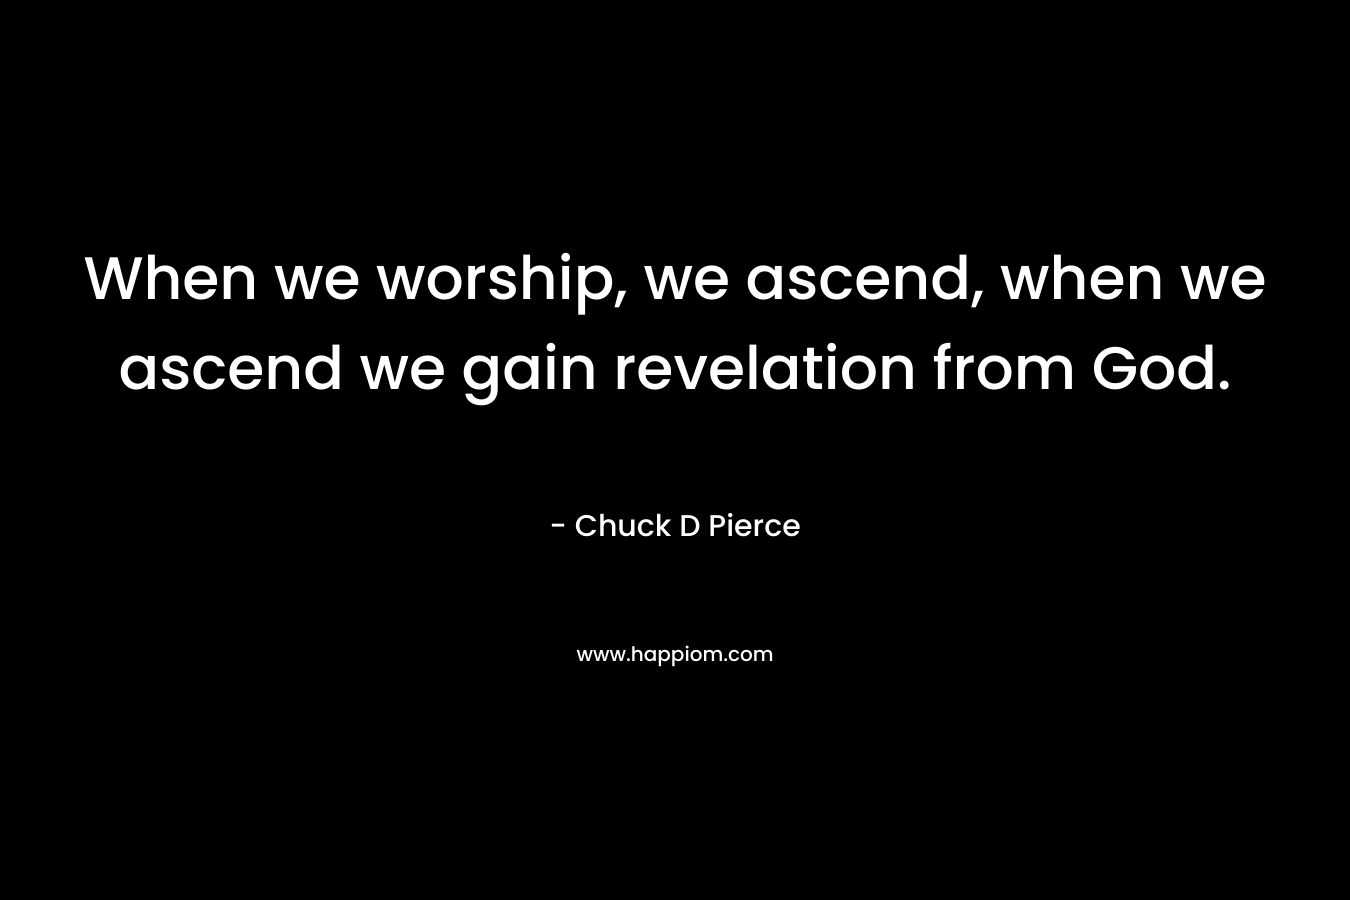 When we worship, we ascend, when we ascend we gain revelation from God. – Chuck D Pierce